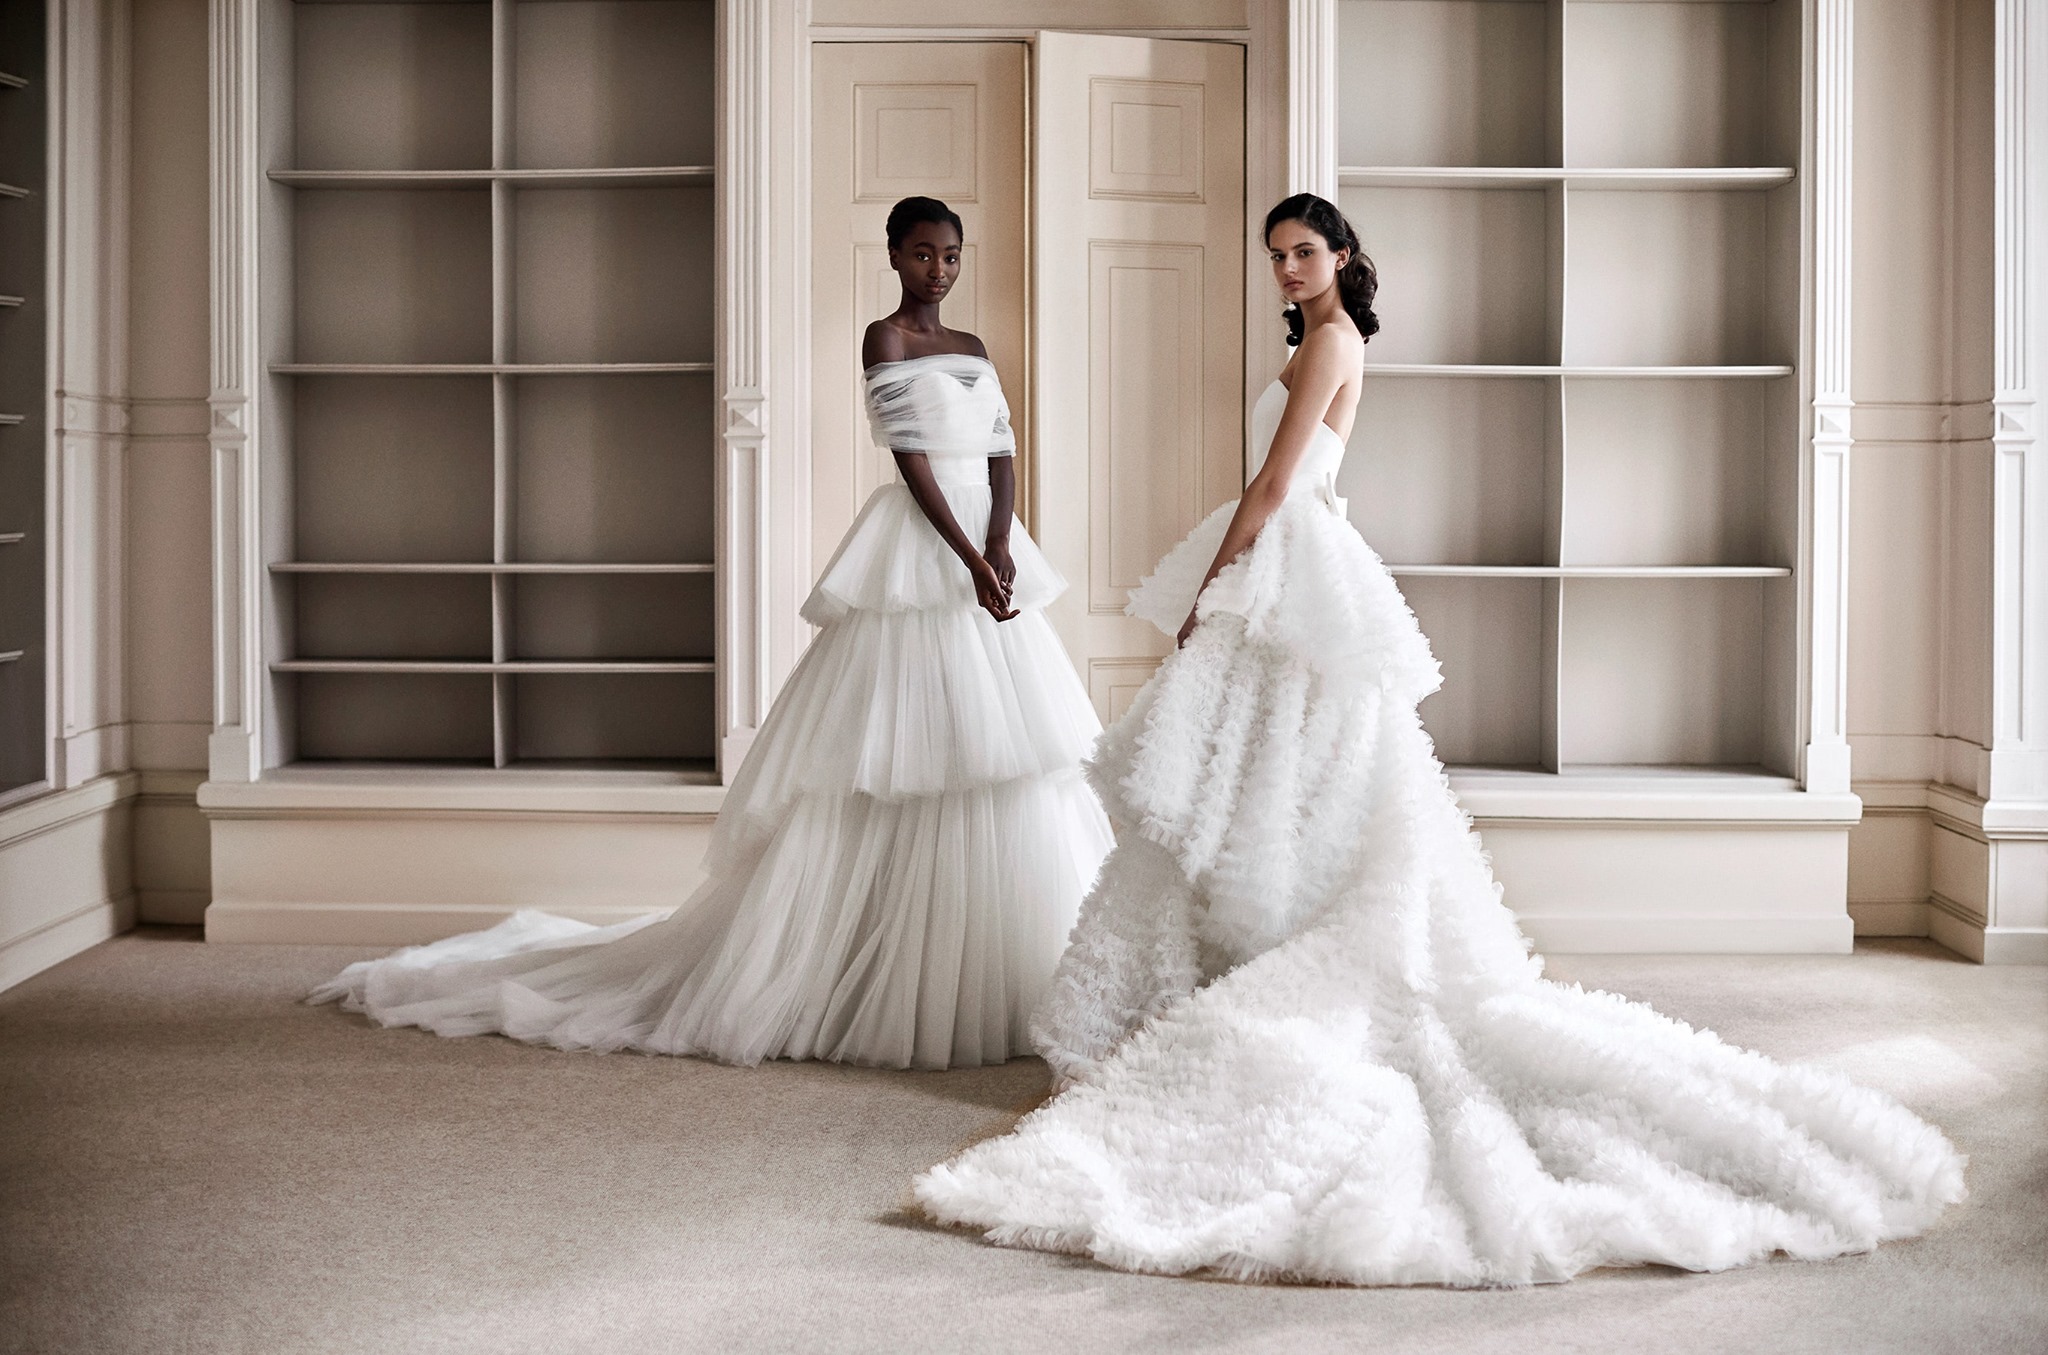 Tiered 2 wedding dresses Viktor&Rolf Bridal Couture Spring-Summer 2021 collection